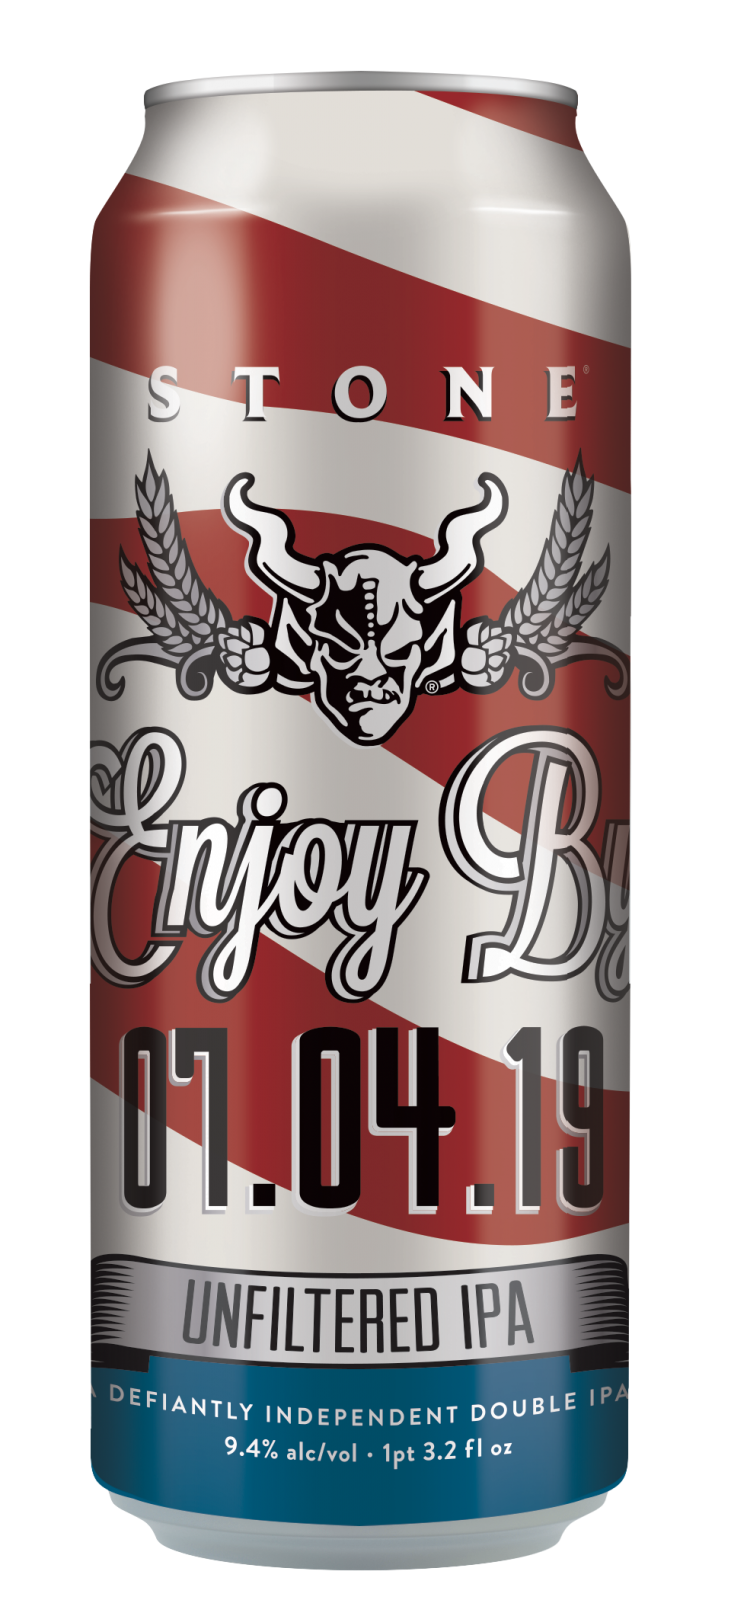 STONE ENJOY BY 7.04.19 UNFILTERED DOUBLE IPA 1pt 3.2oz can